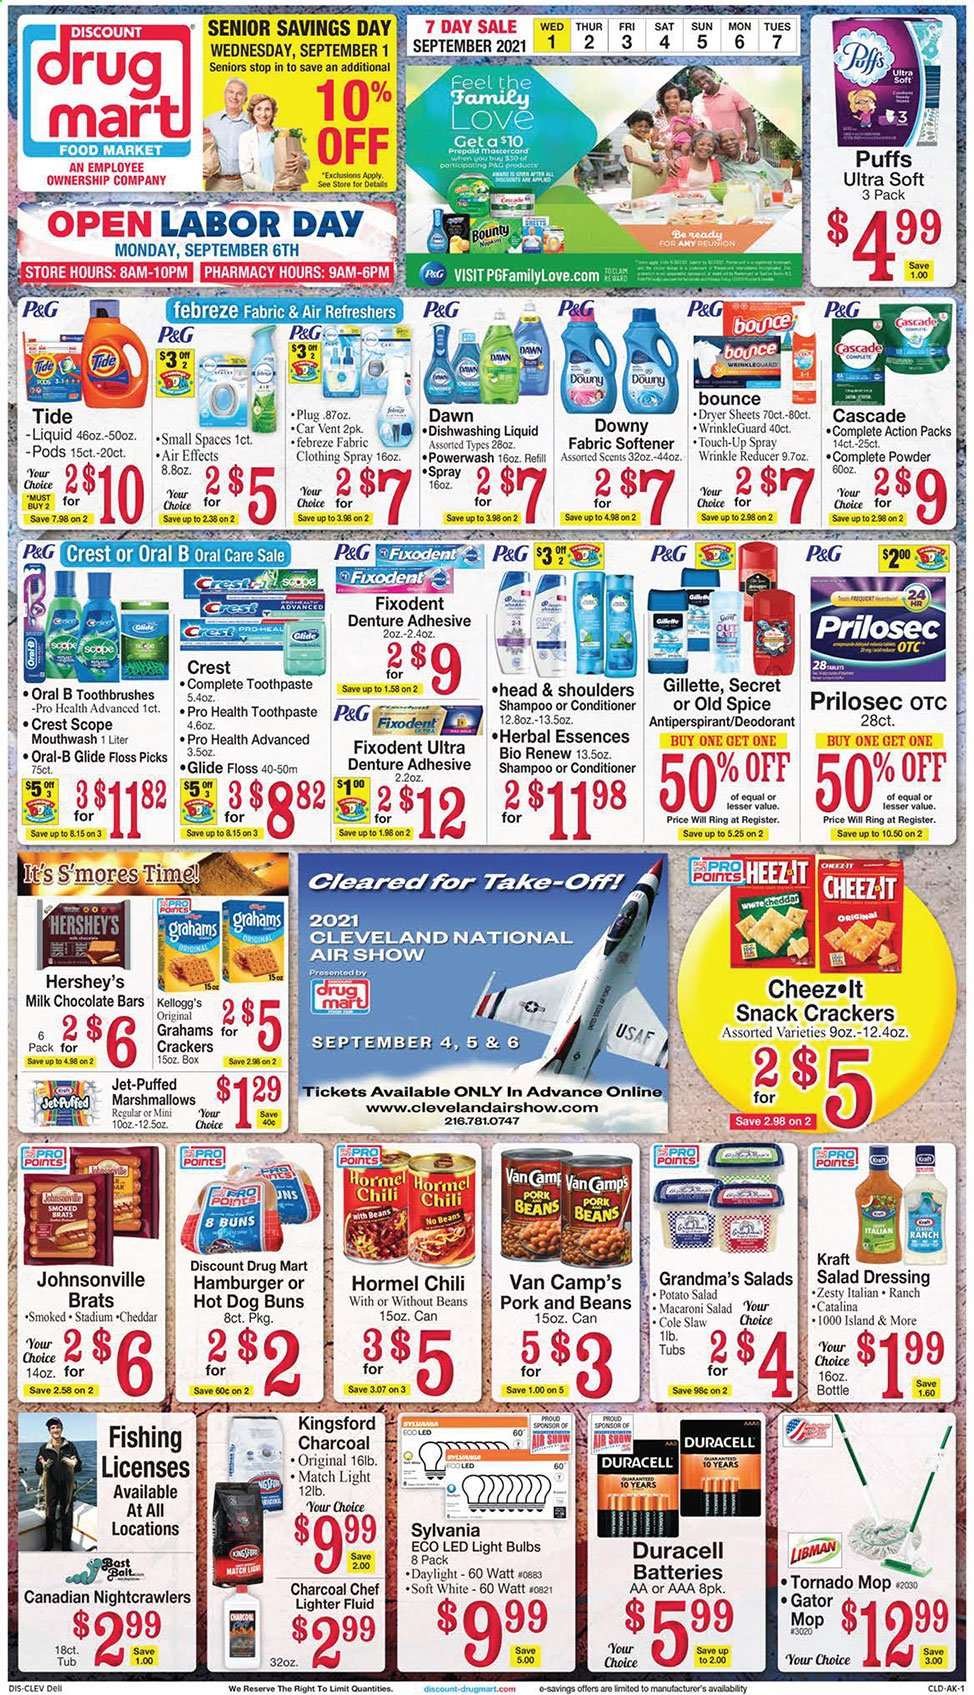 thumbnail - Discount Drug Mart Flyer - 09/01/2021 - 09/07/2021 - Sales products - buns, puffs, beans, Kraft®, Hormel, Johnsonville, potato salad, macaroni salad, Hershey's, marshmallows, milk chocolate, snack, Bounty, crackers, Kellogg's, chocolate bar, spice, salad dressing, dressing, Febreze, Cascade, Tide, fabric softener, Bounce, dryer sheets, dishwashing liquid, Jet, shampoo, Old Spice, Oral-B, toothpaste, mouthwash, Fixodent, Crest, conditioner, Head & Shoulders, Herbal Essences, anti-perspirant, deodorant, Gillette, mop, battery, bulb, Duracell, light bulb, Sylvania, animal food, nightcrawlers. Page 1.